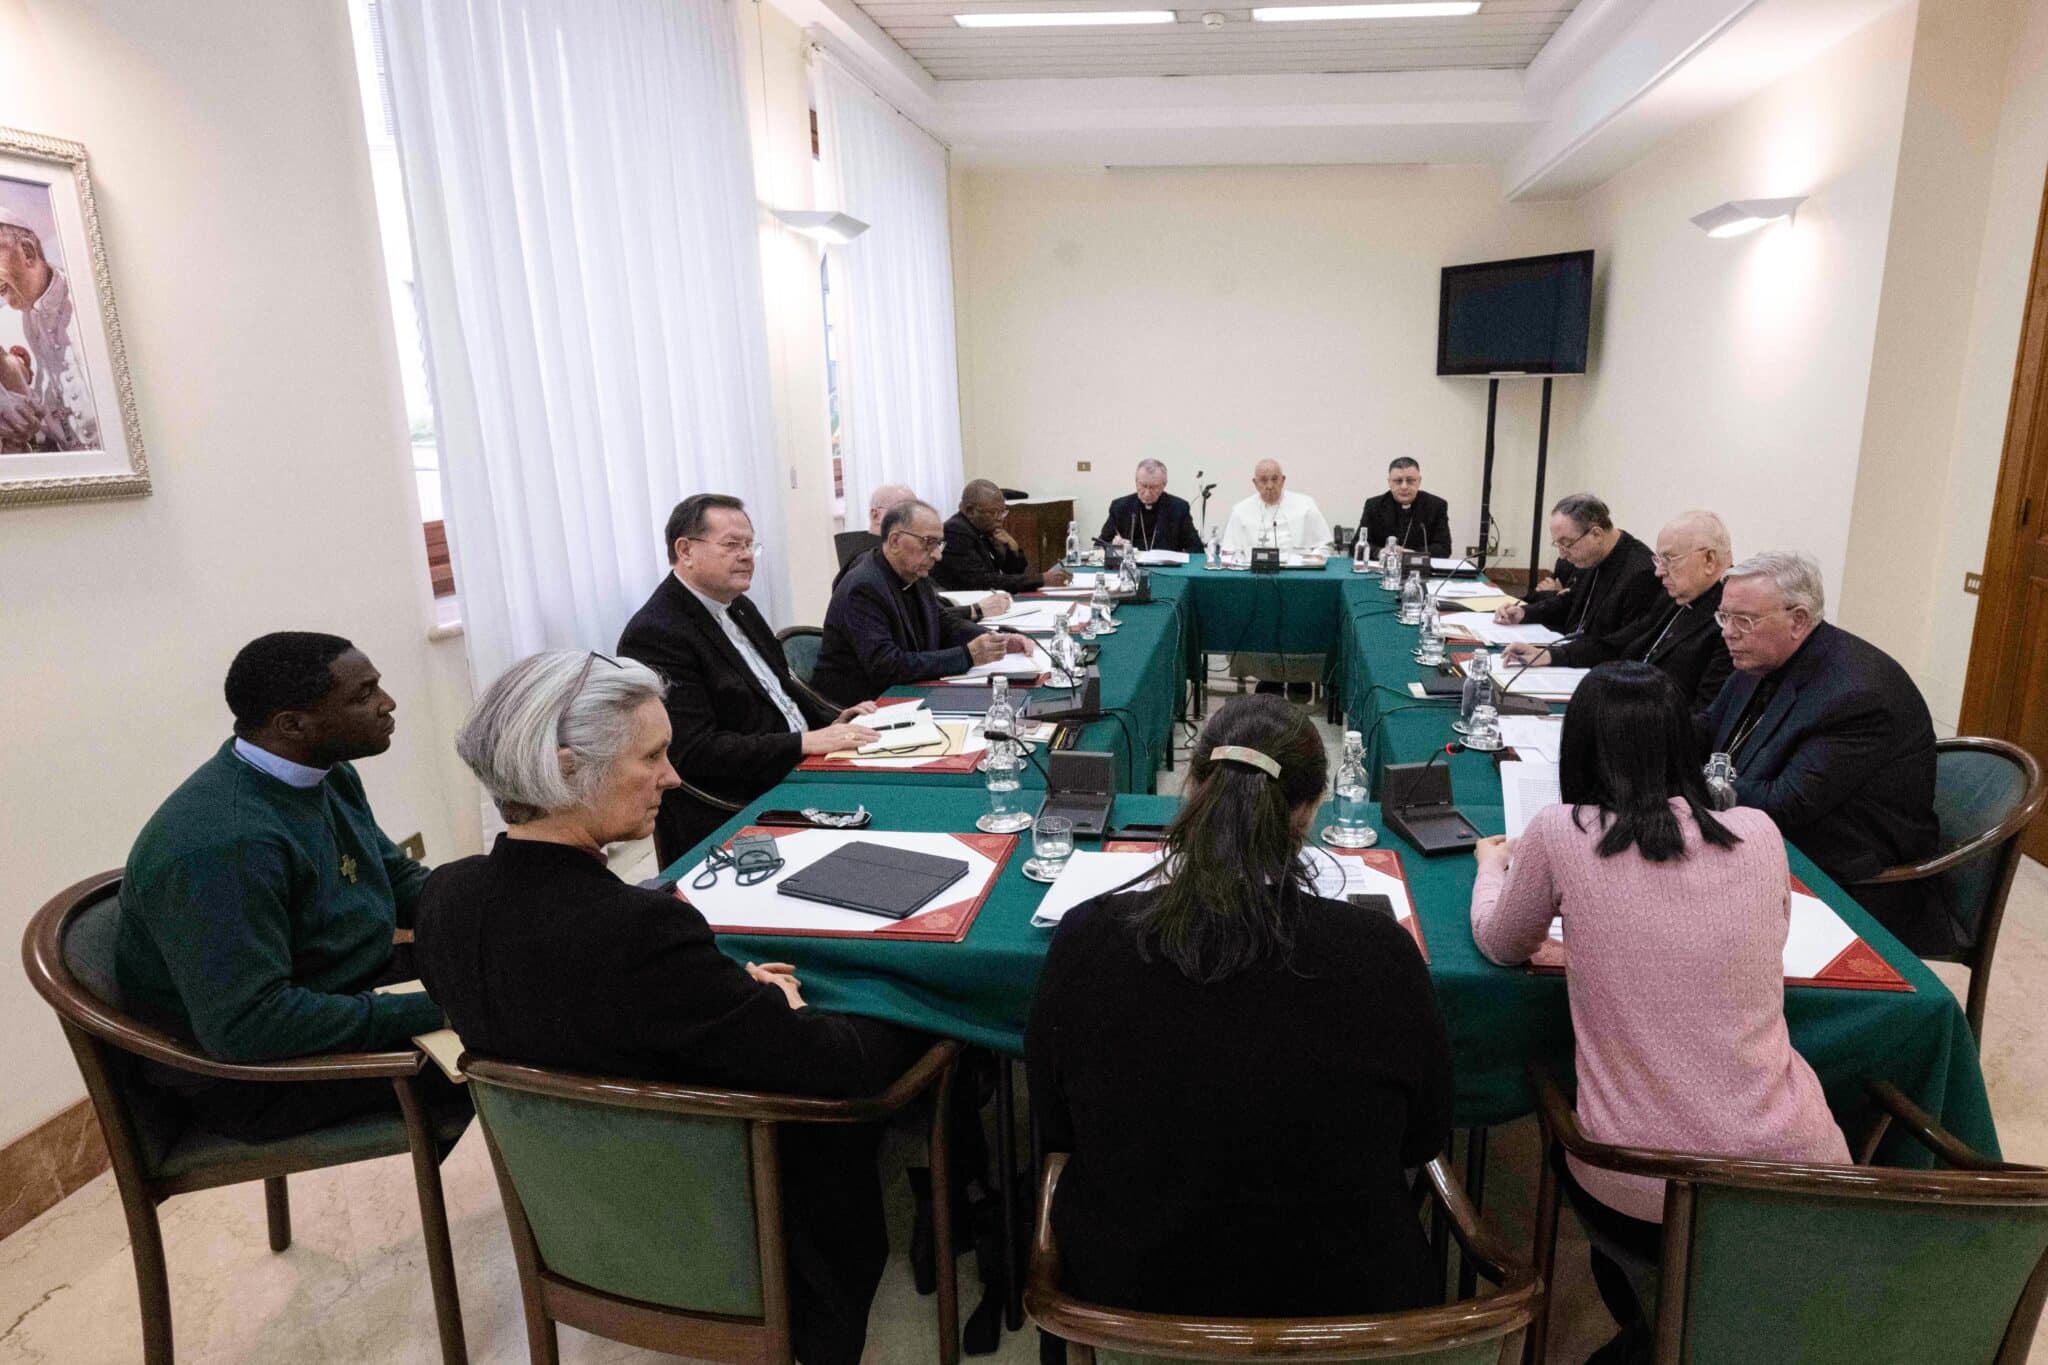 pope-francis-council-of-cardinals-discuss-role-of-women-in-Church